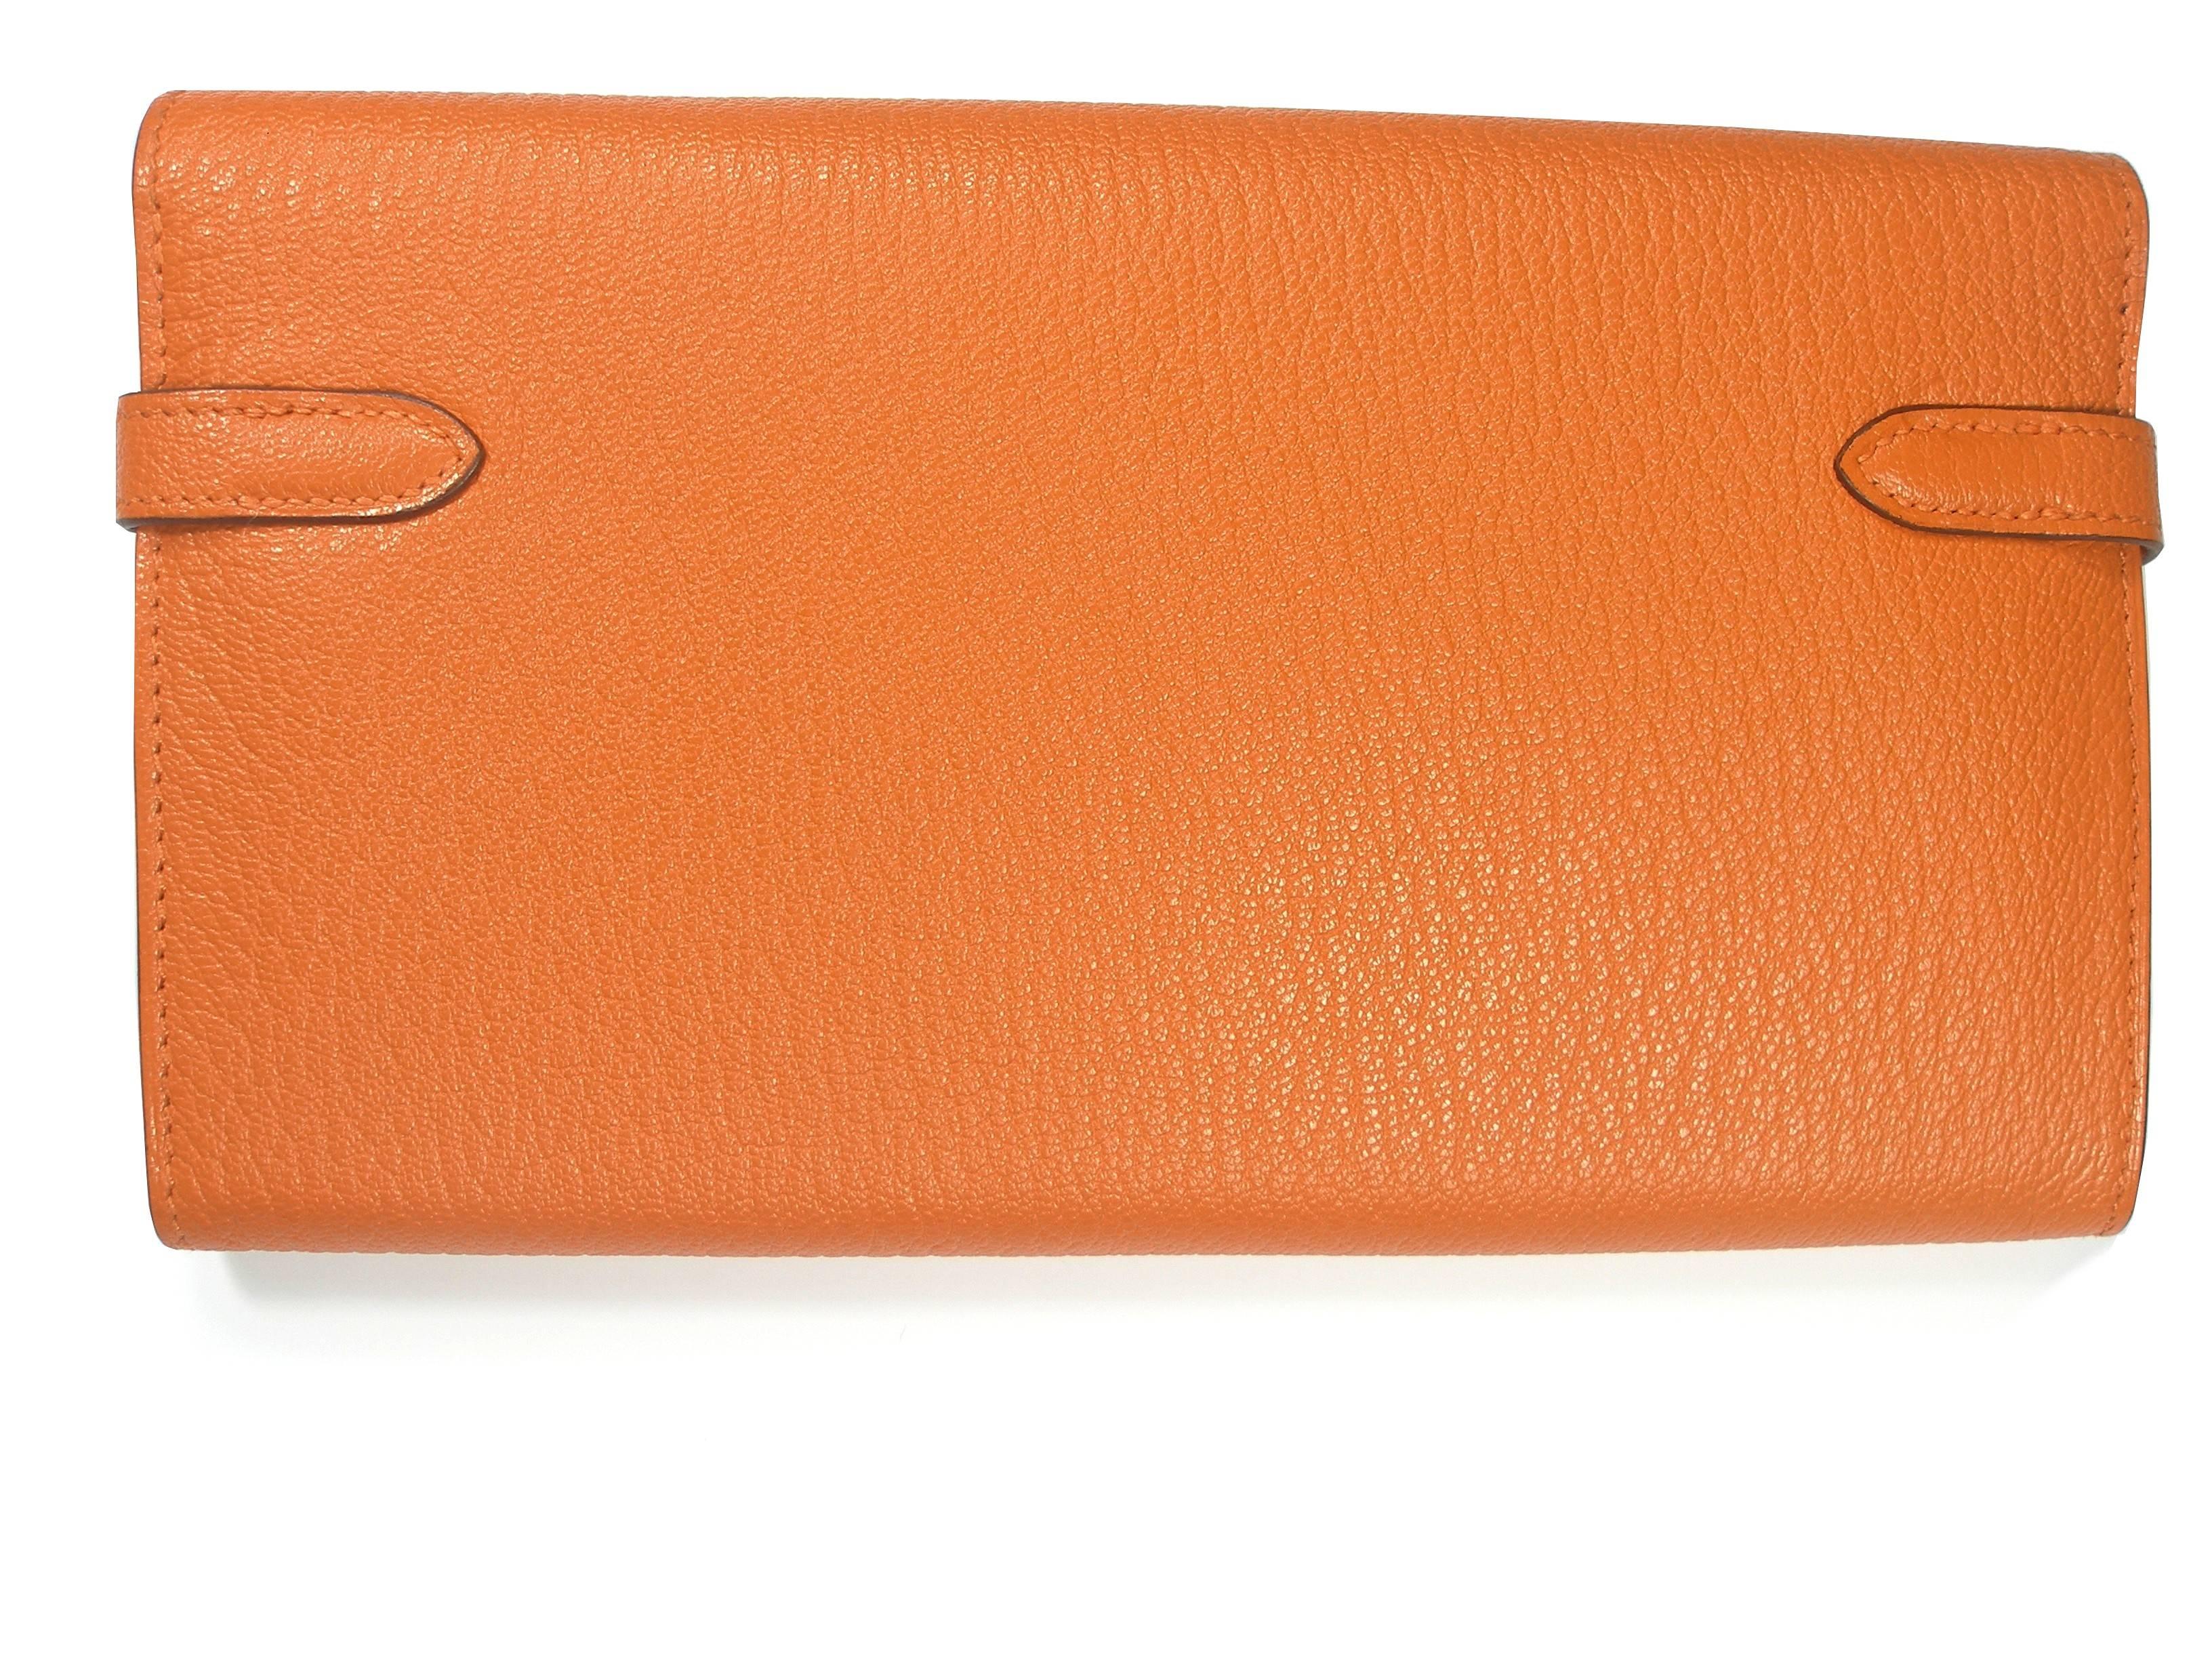 Wonderfull Hermès Kelly long wallet
Mysore leather 
Color : orange
Stamp : R  / 2014 
Plastic is still on Palladium hardware
Dimensions : 20 x 11 x 1.5 cm 
Please considere for this purchase : It comes from Sales reserved only to Hermès Staff